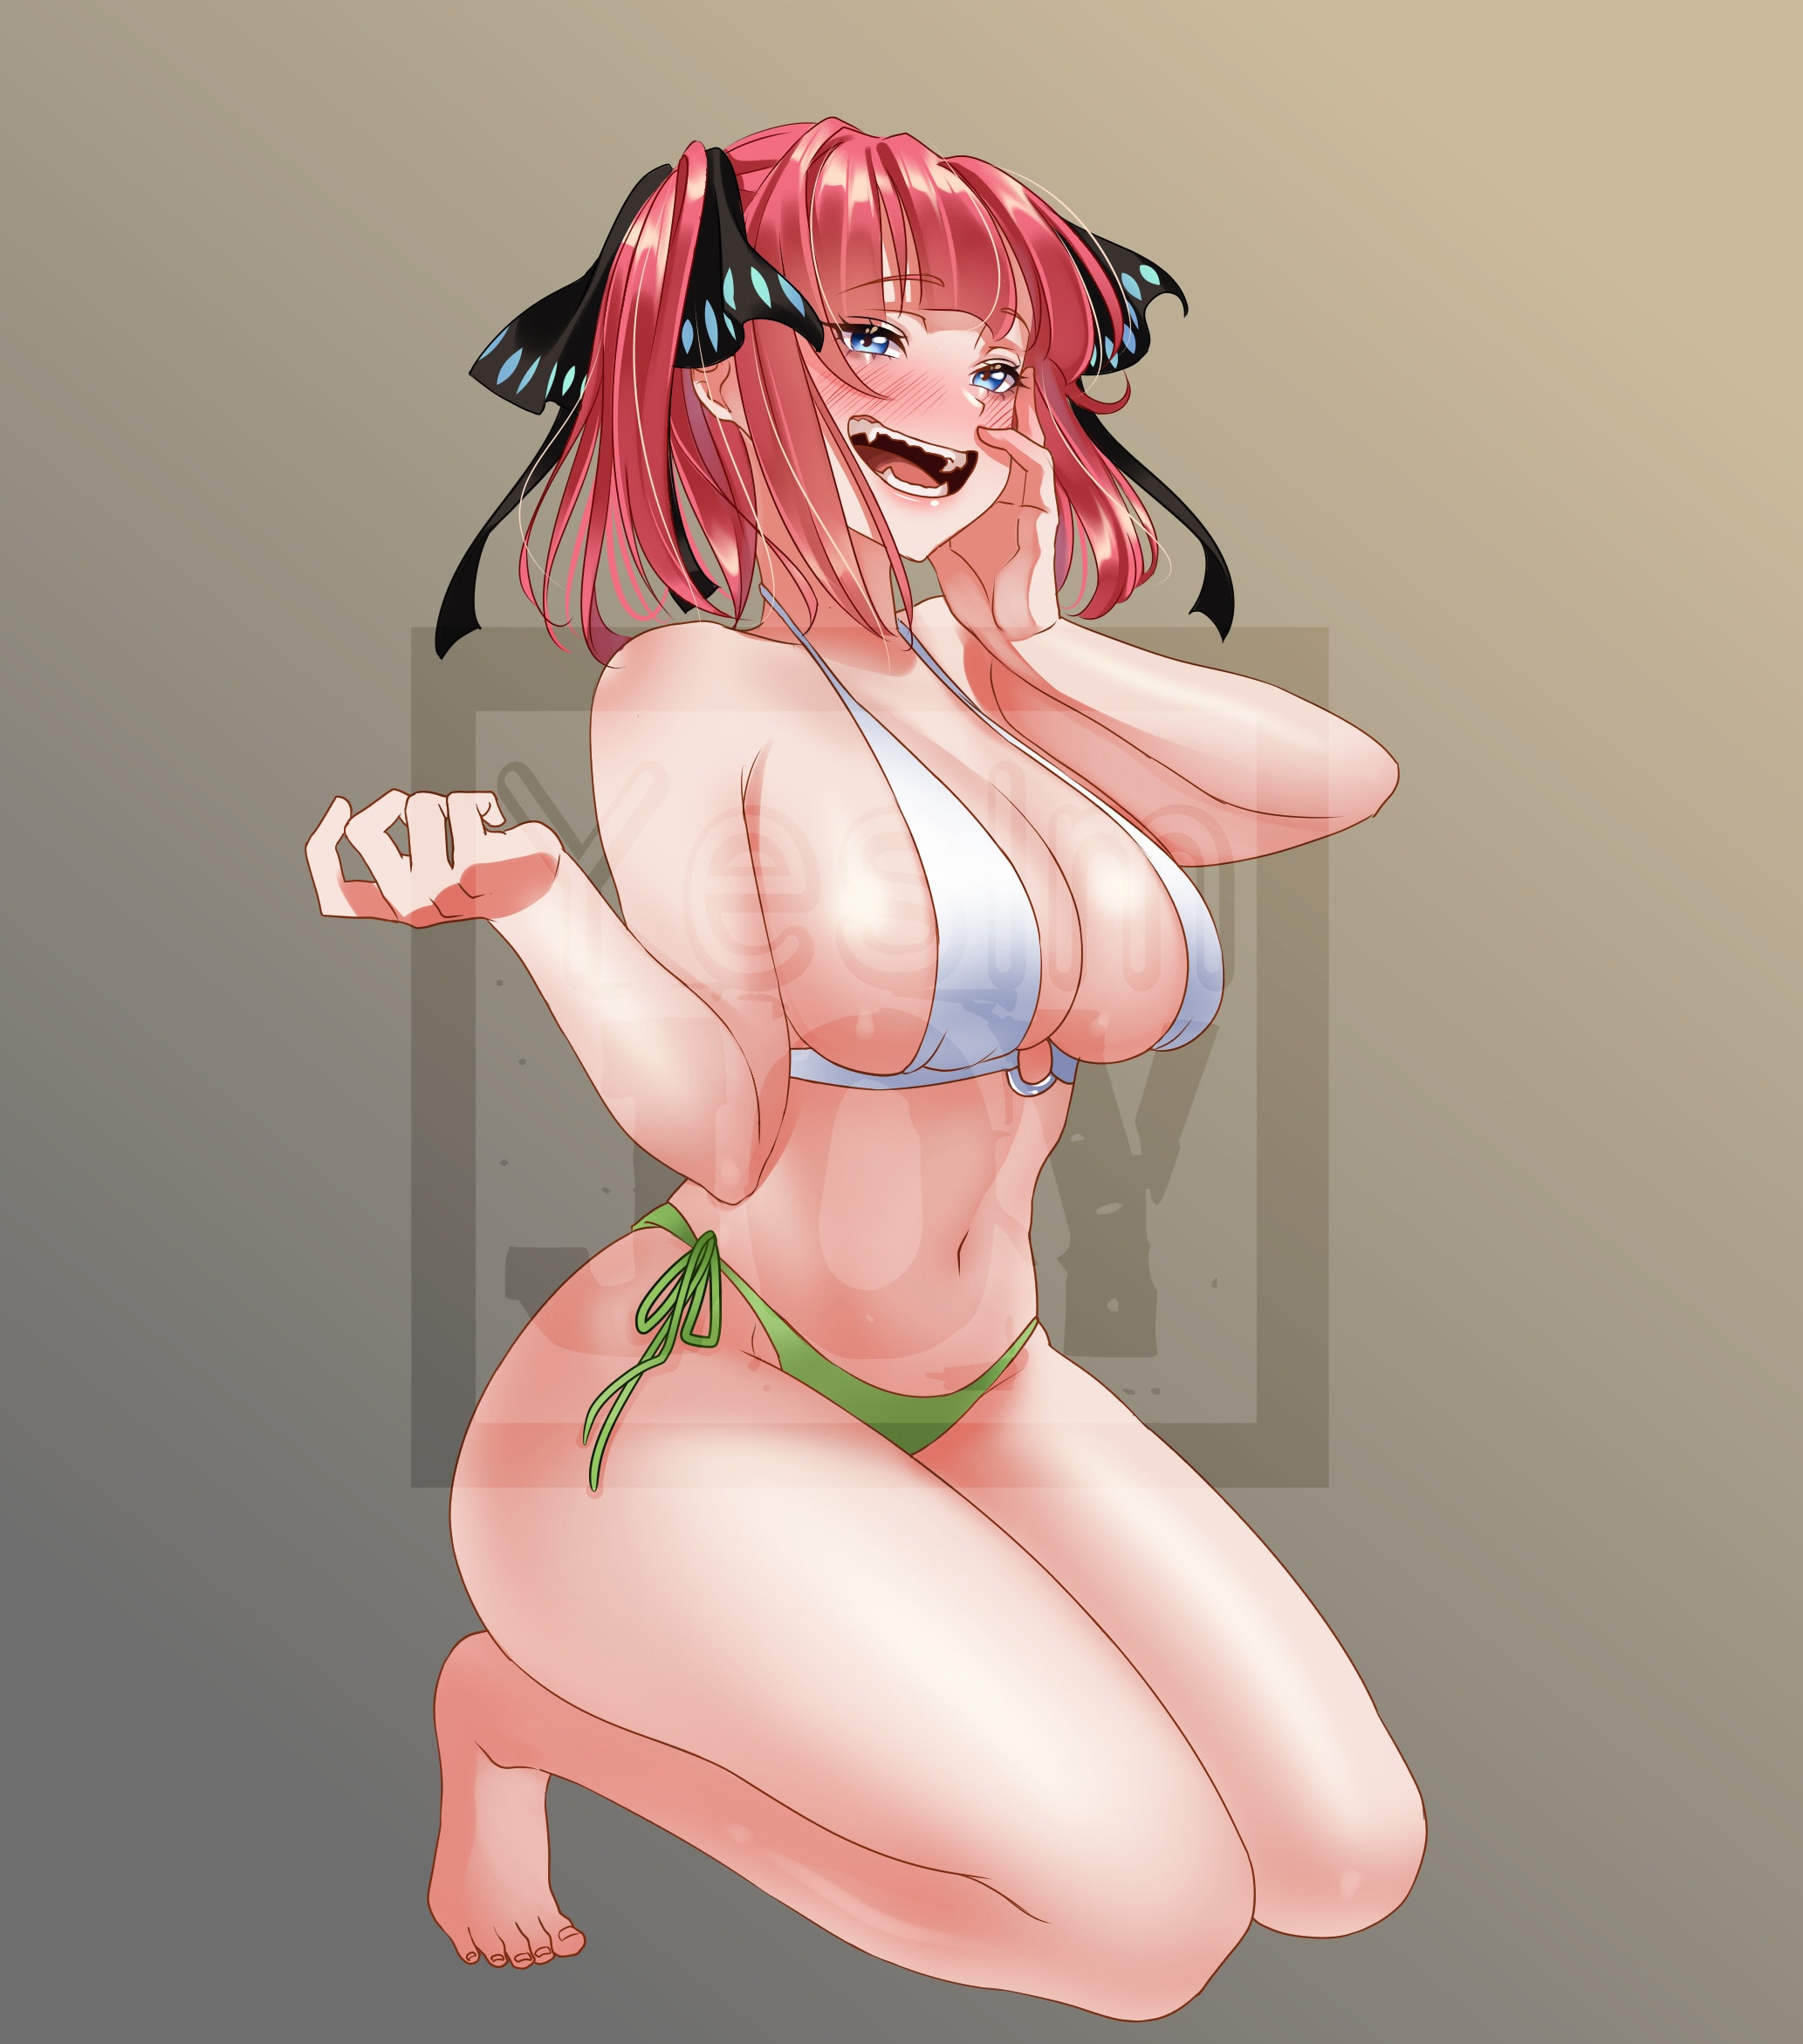 Draw ecchi nsfw anime art for your oc, fanart and more by Yesimjoy | Fiverr